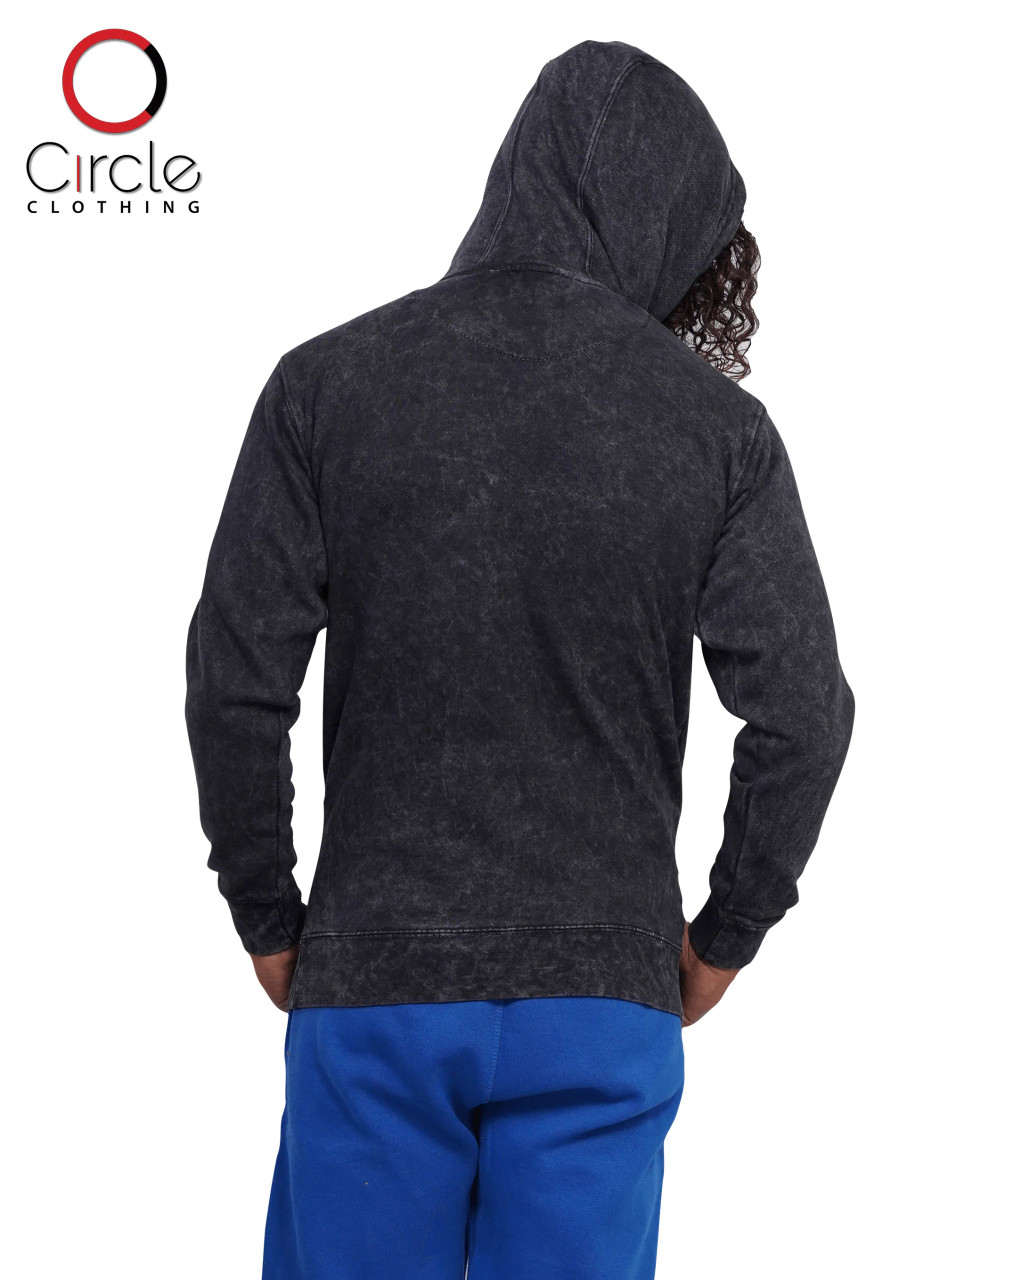 Circle Clothing Unisex Fleece Perfect Pullover Mineral Wash Hoodie 8.25 Oz